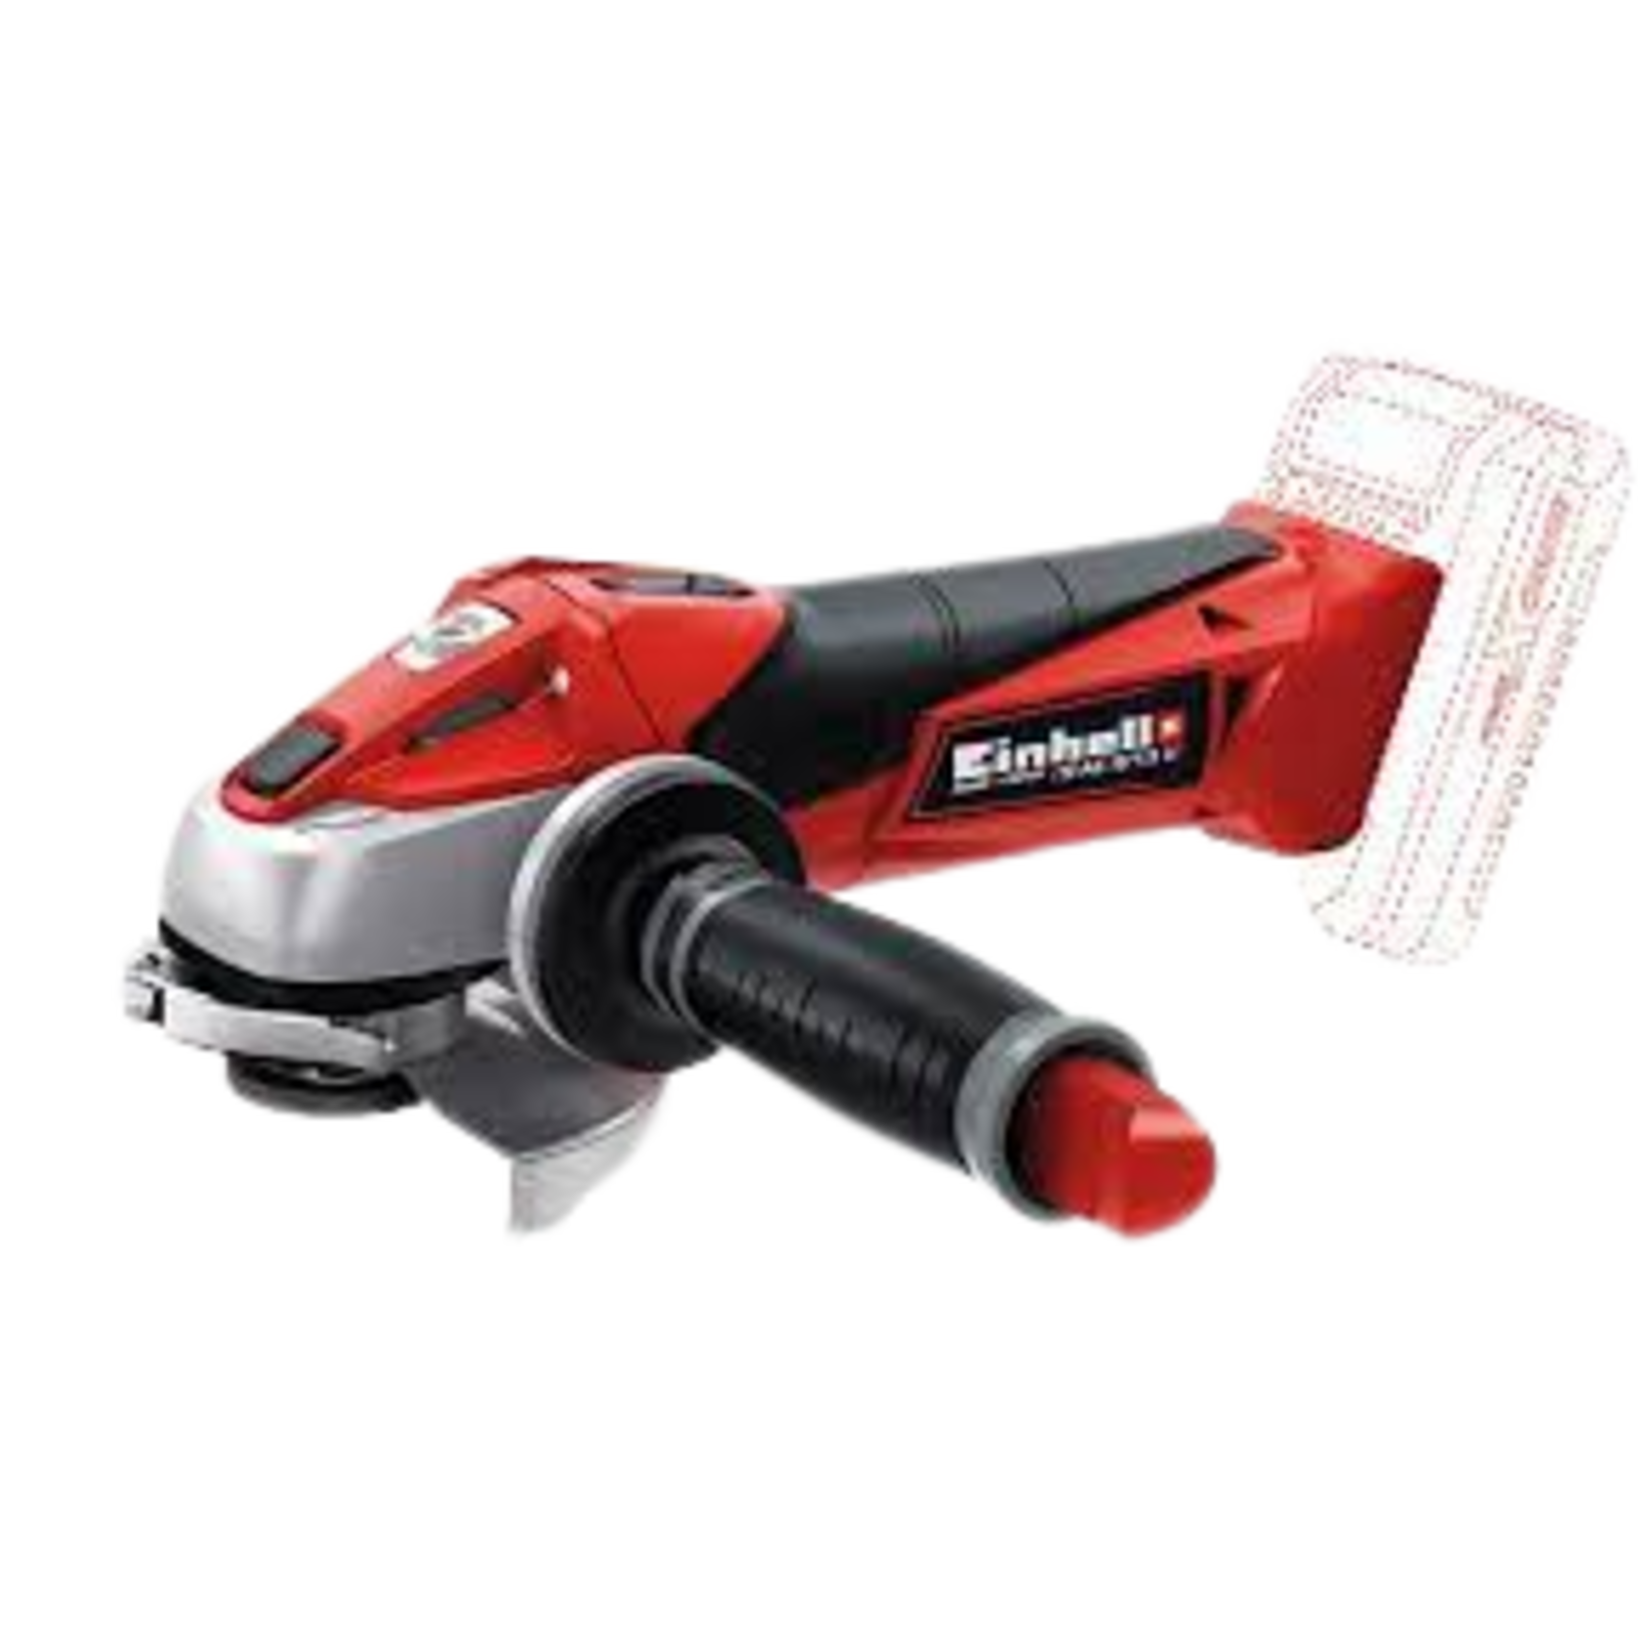 EINHELL 18V 4-1/2IN CORDLESS ANGLE GRINDER